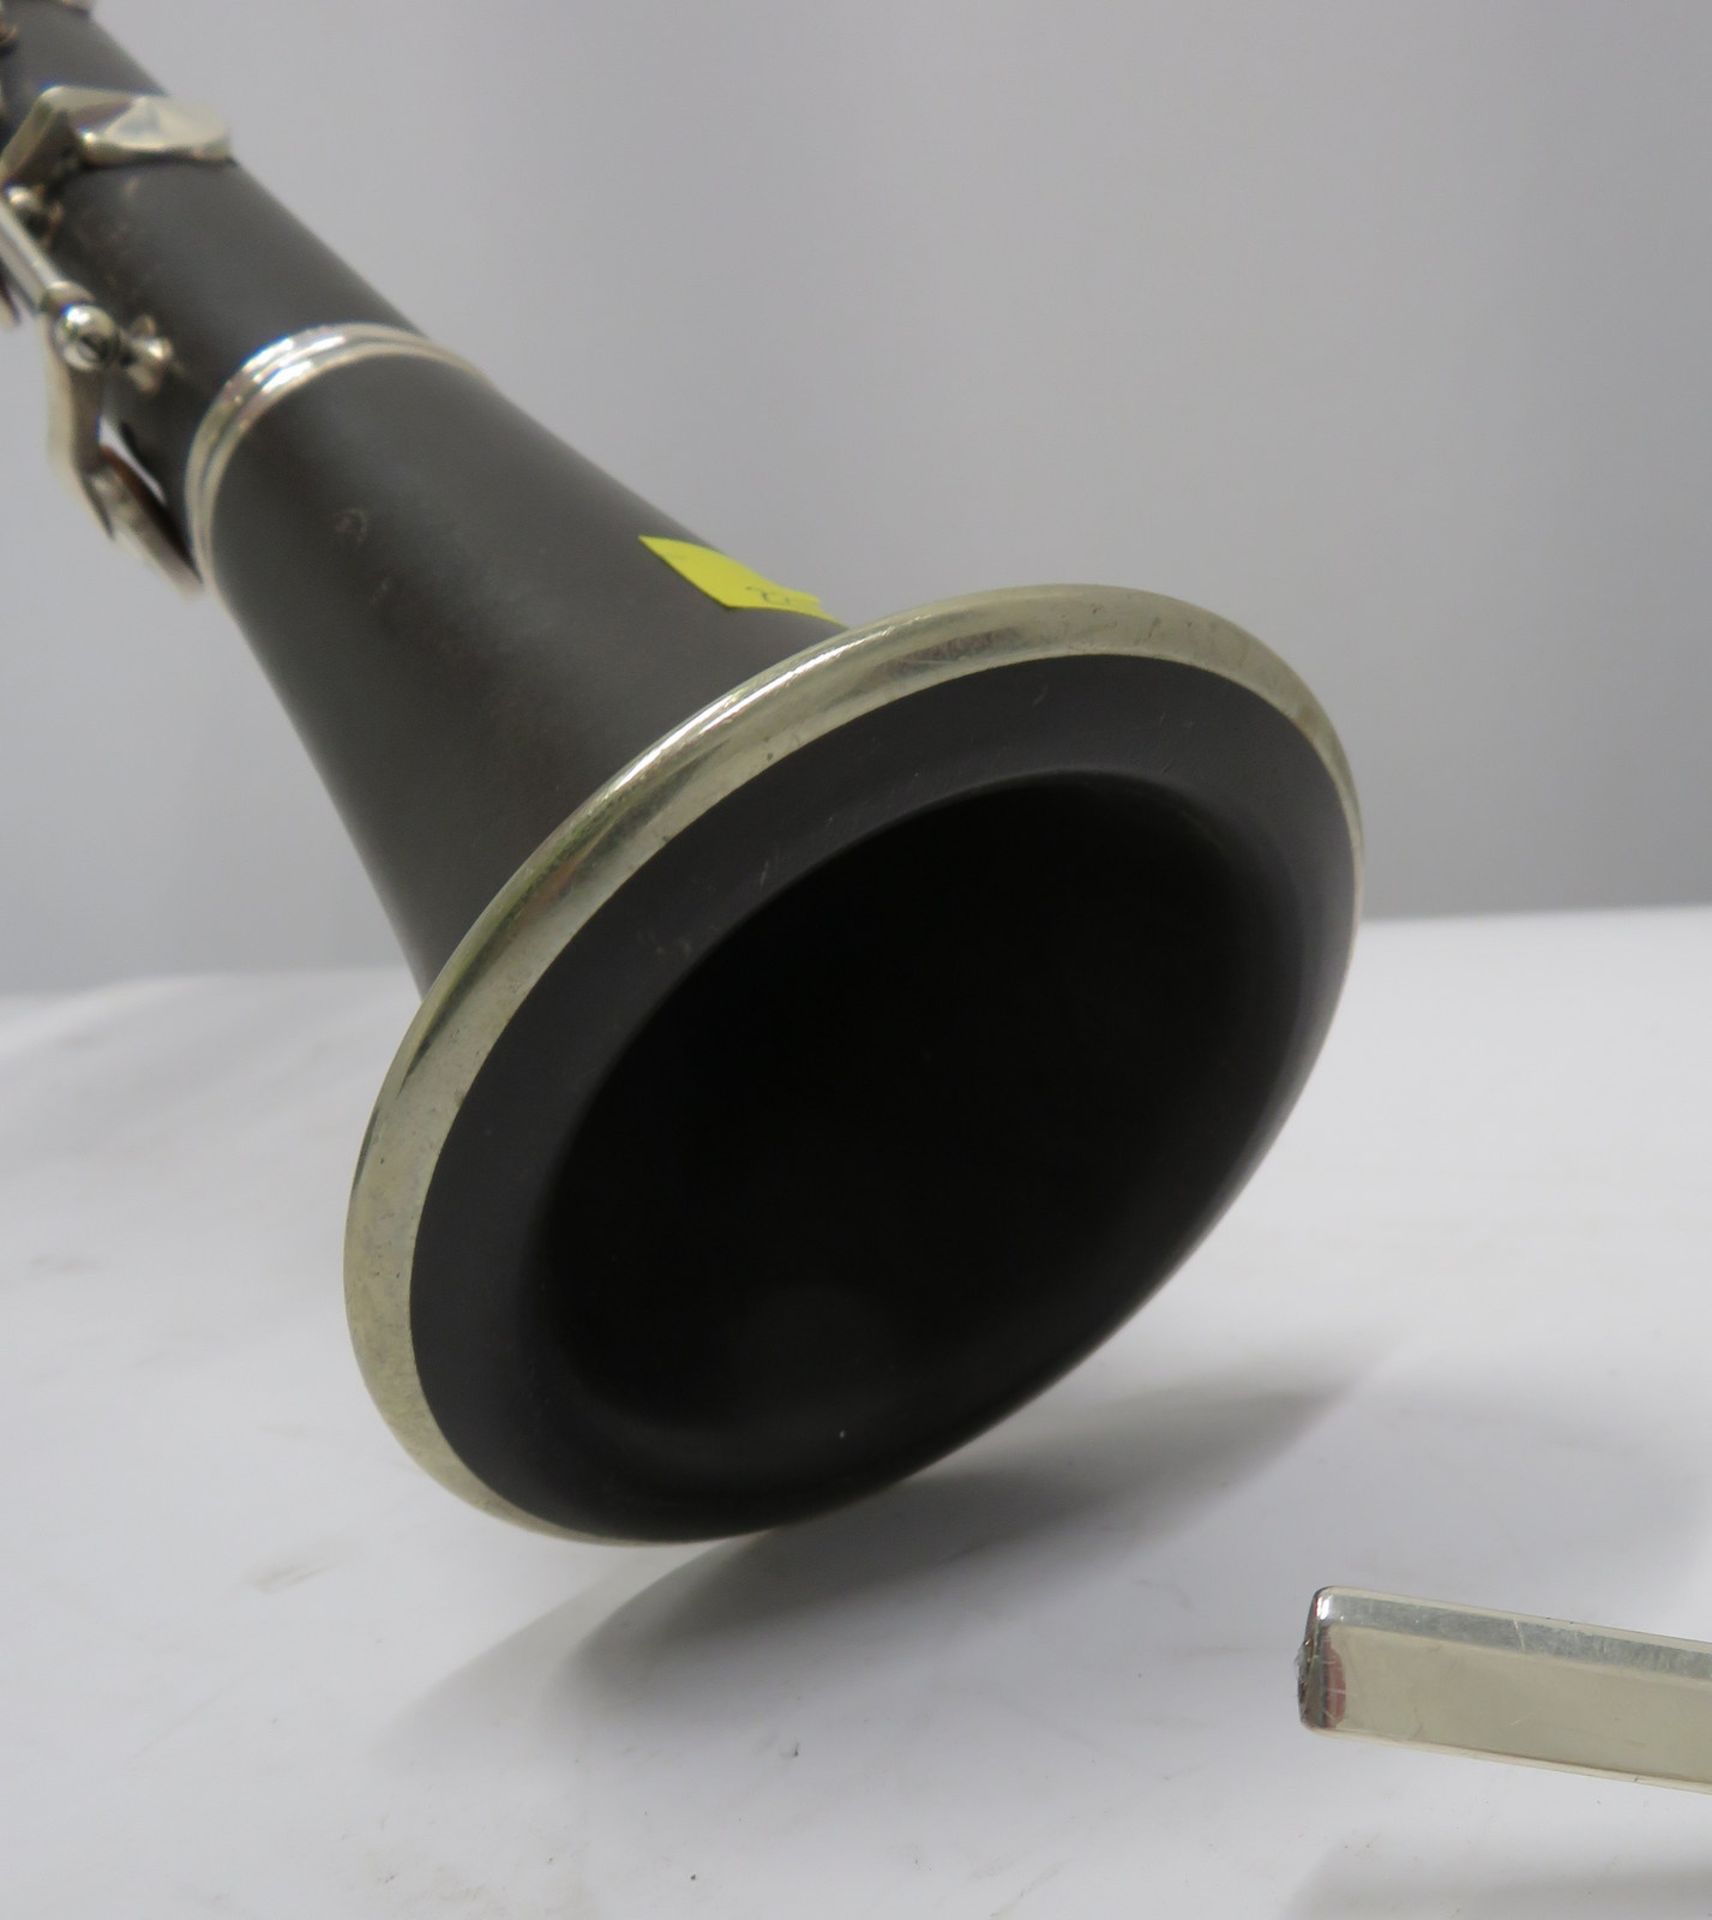 Buffet Crampon L Green clarinet with case. Serial number: 477678. - Image 9 of 19